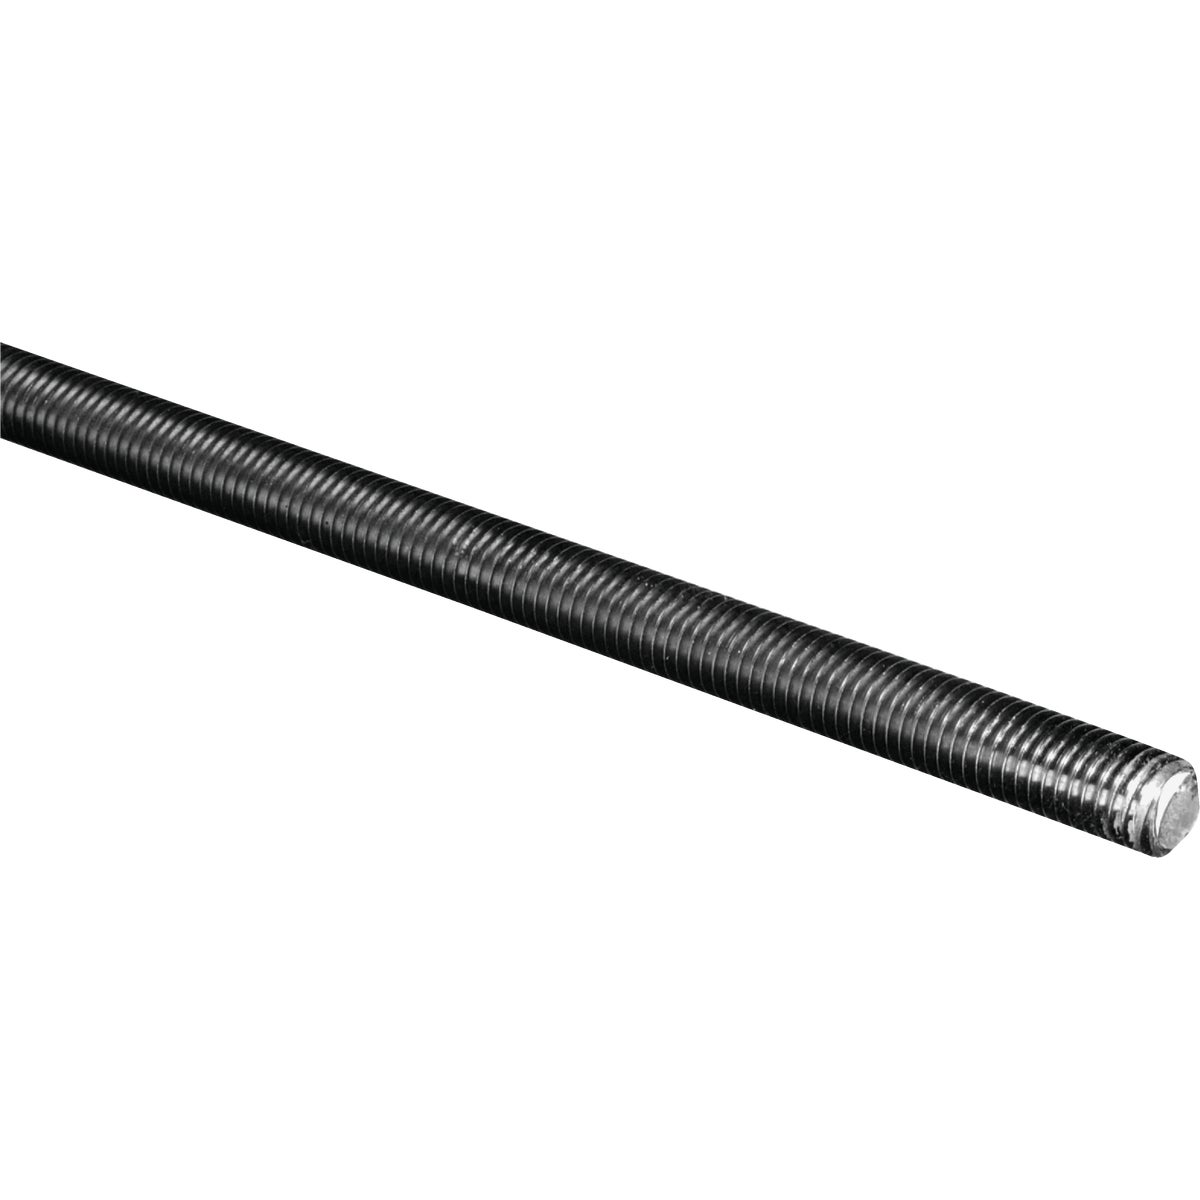 Item 736118, All-thread 304SS course rods are ideal for hangers, anchor bolts, U-bolts, 